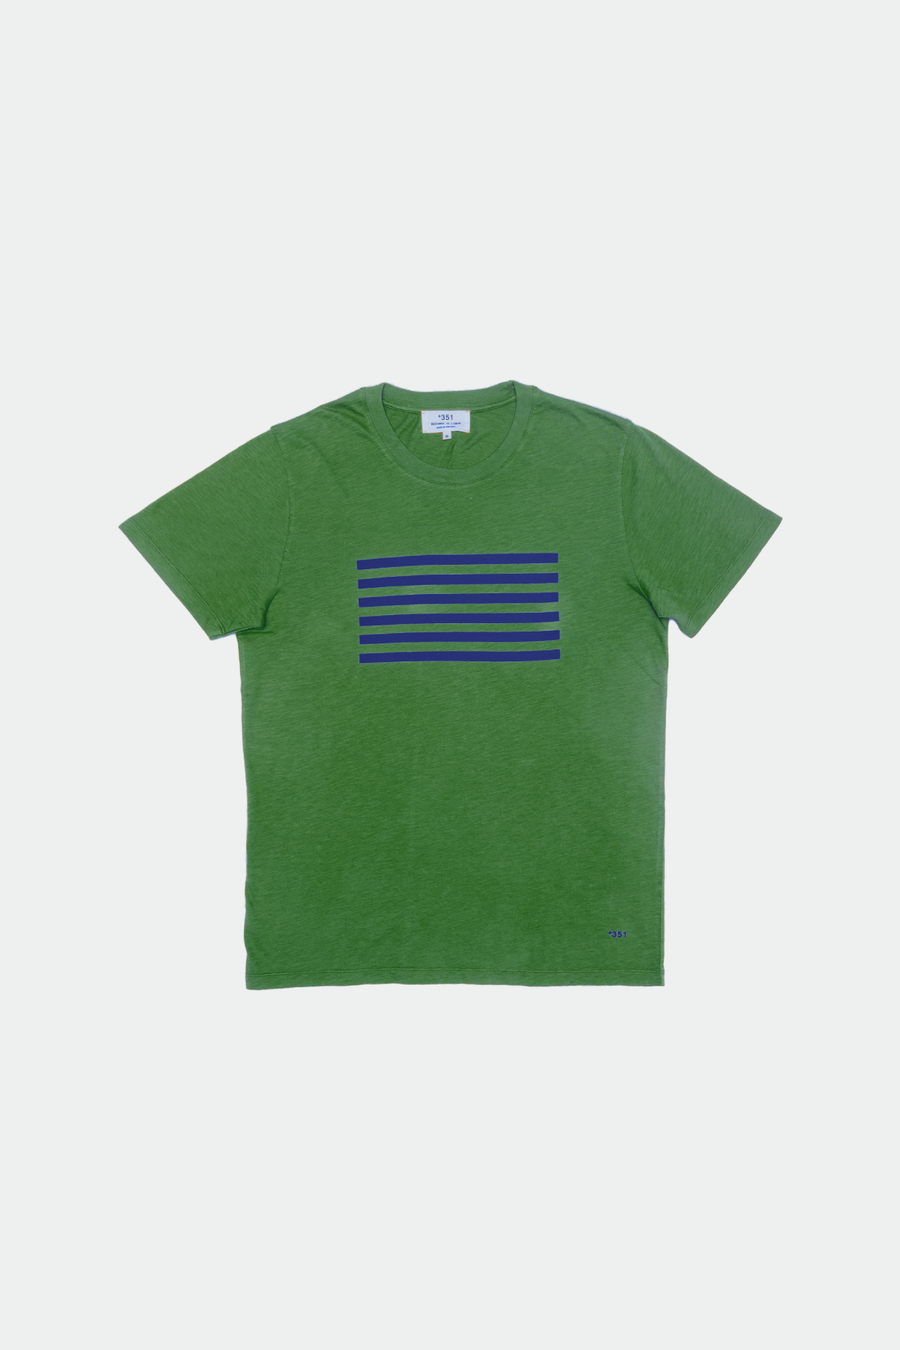 T-Shirts Collection | +351 - DESIGNED IN LISBON | +351